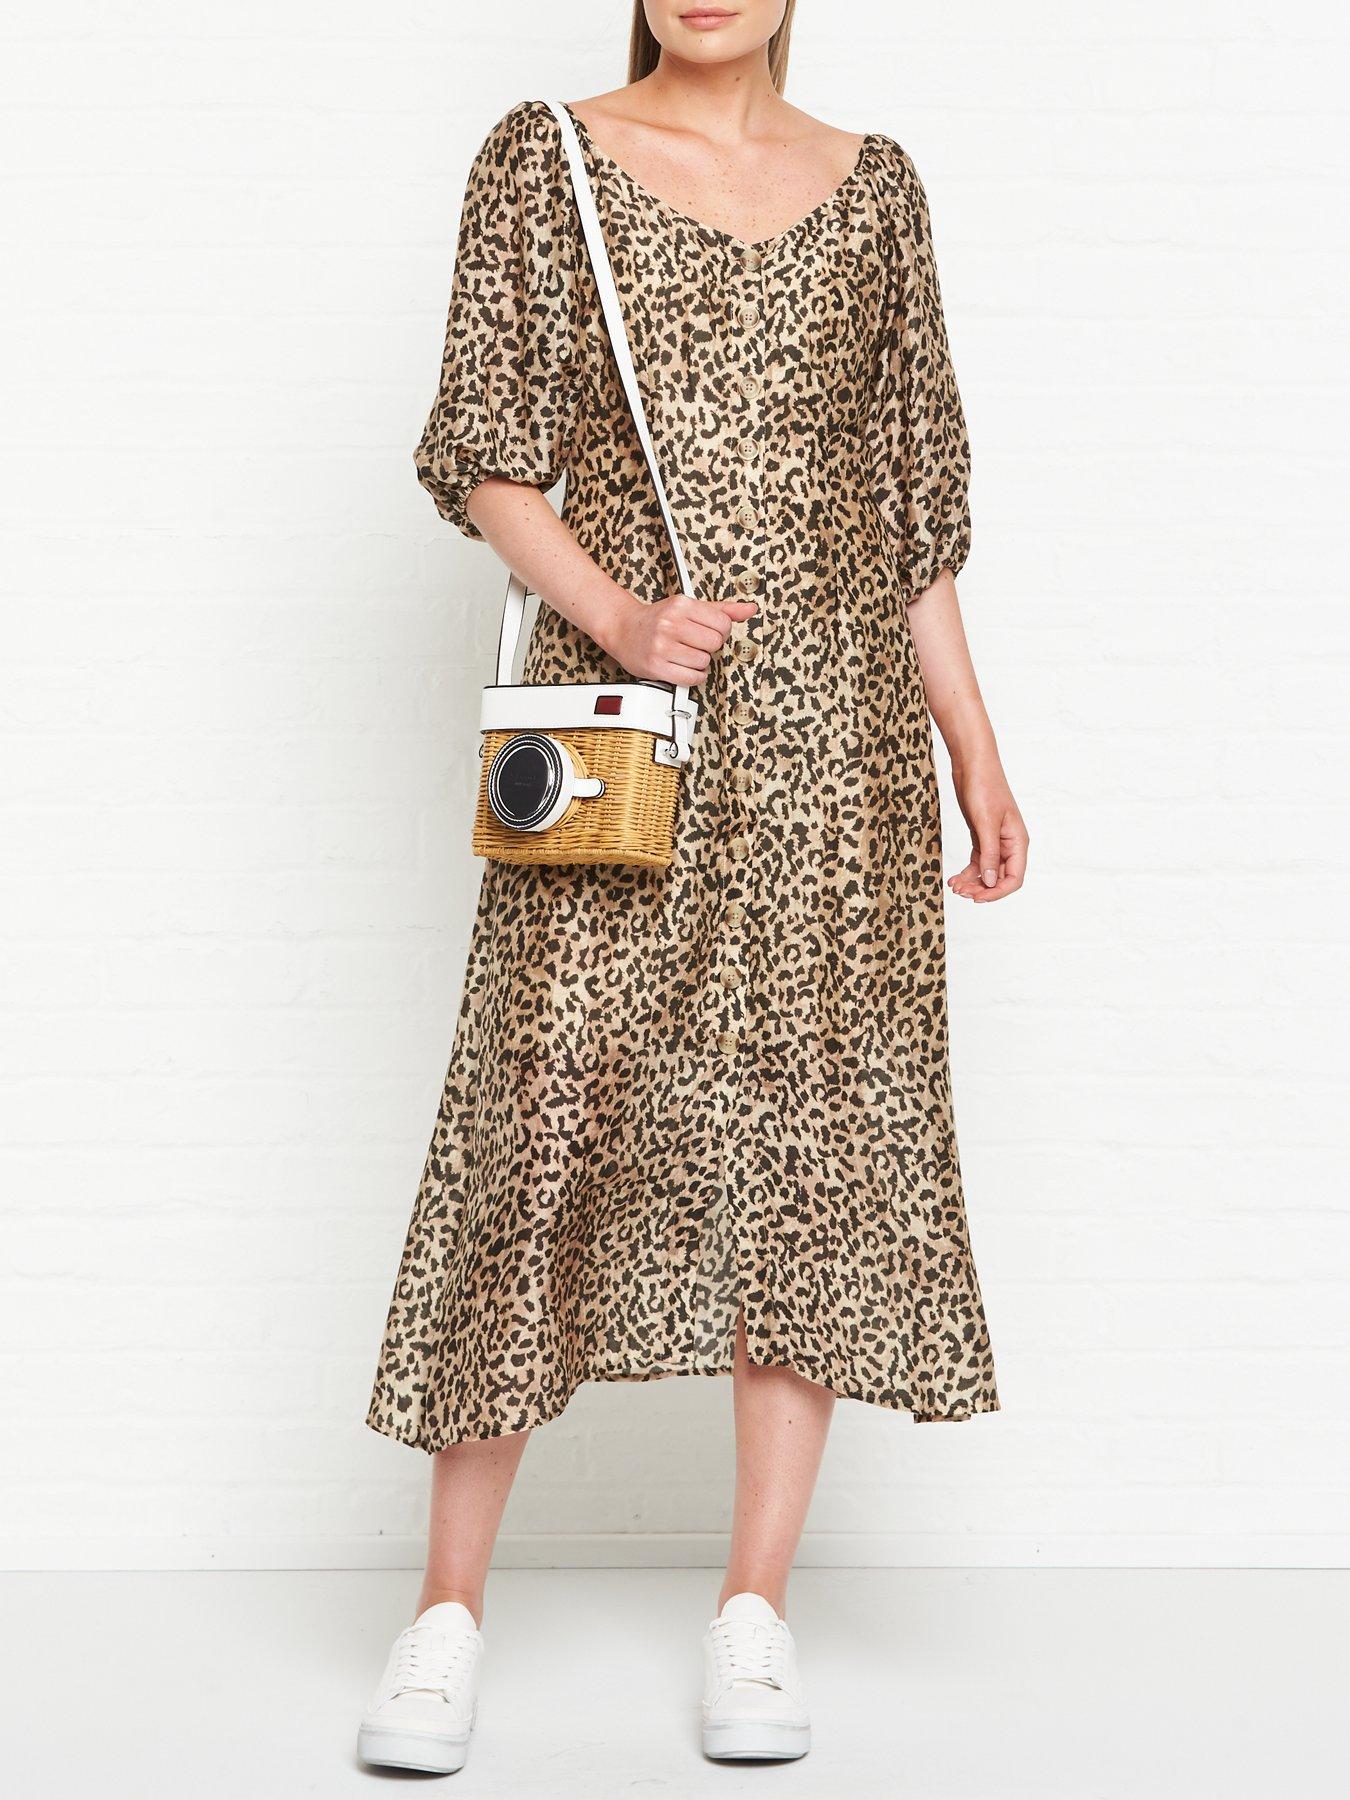 lily and lionel leopard dress